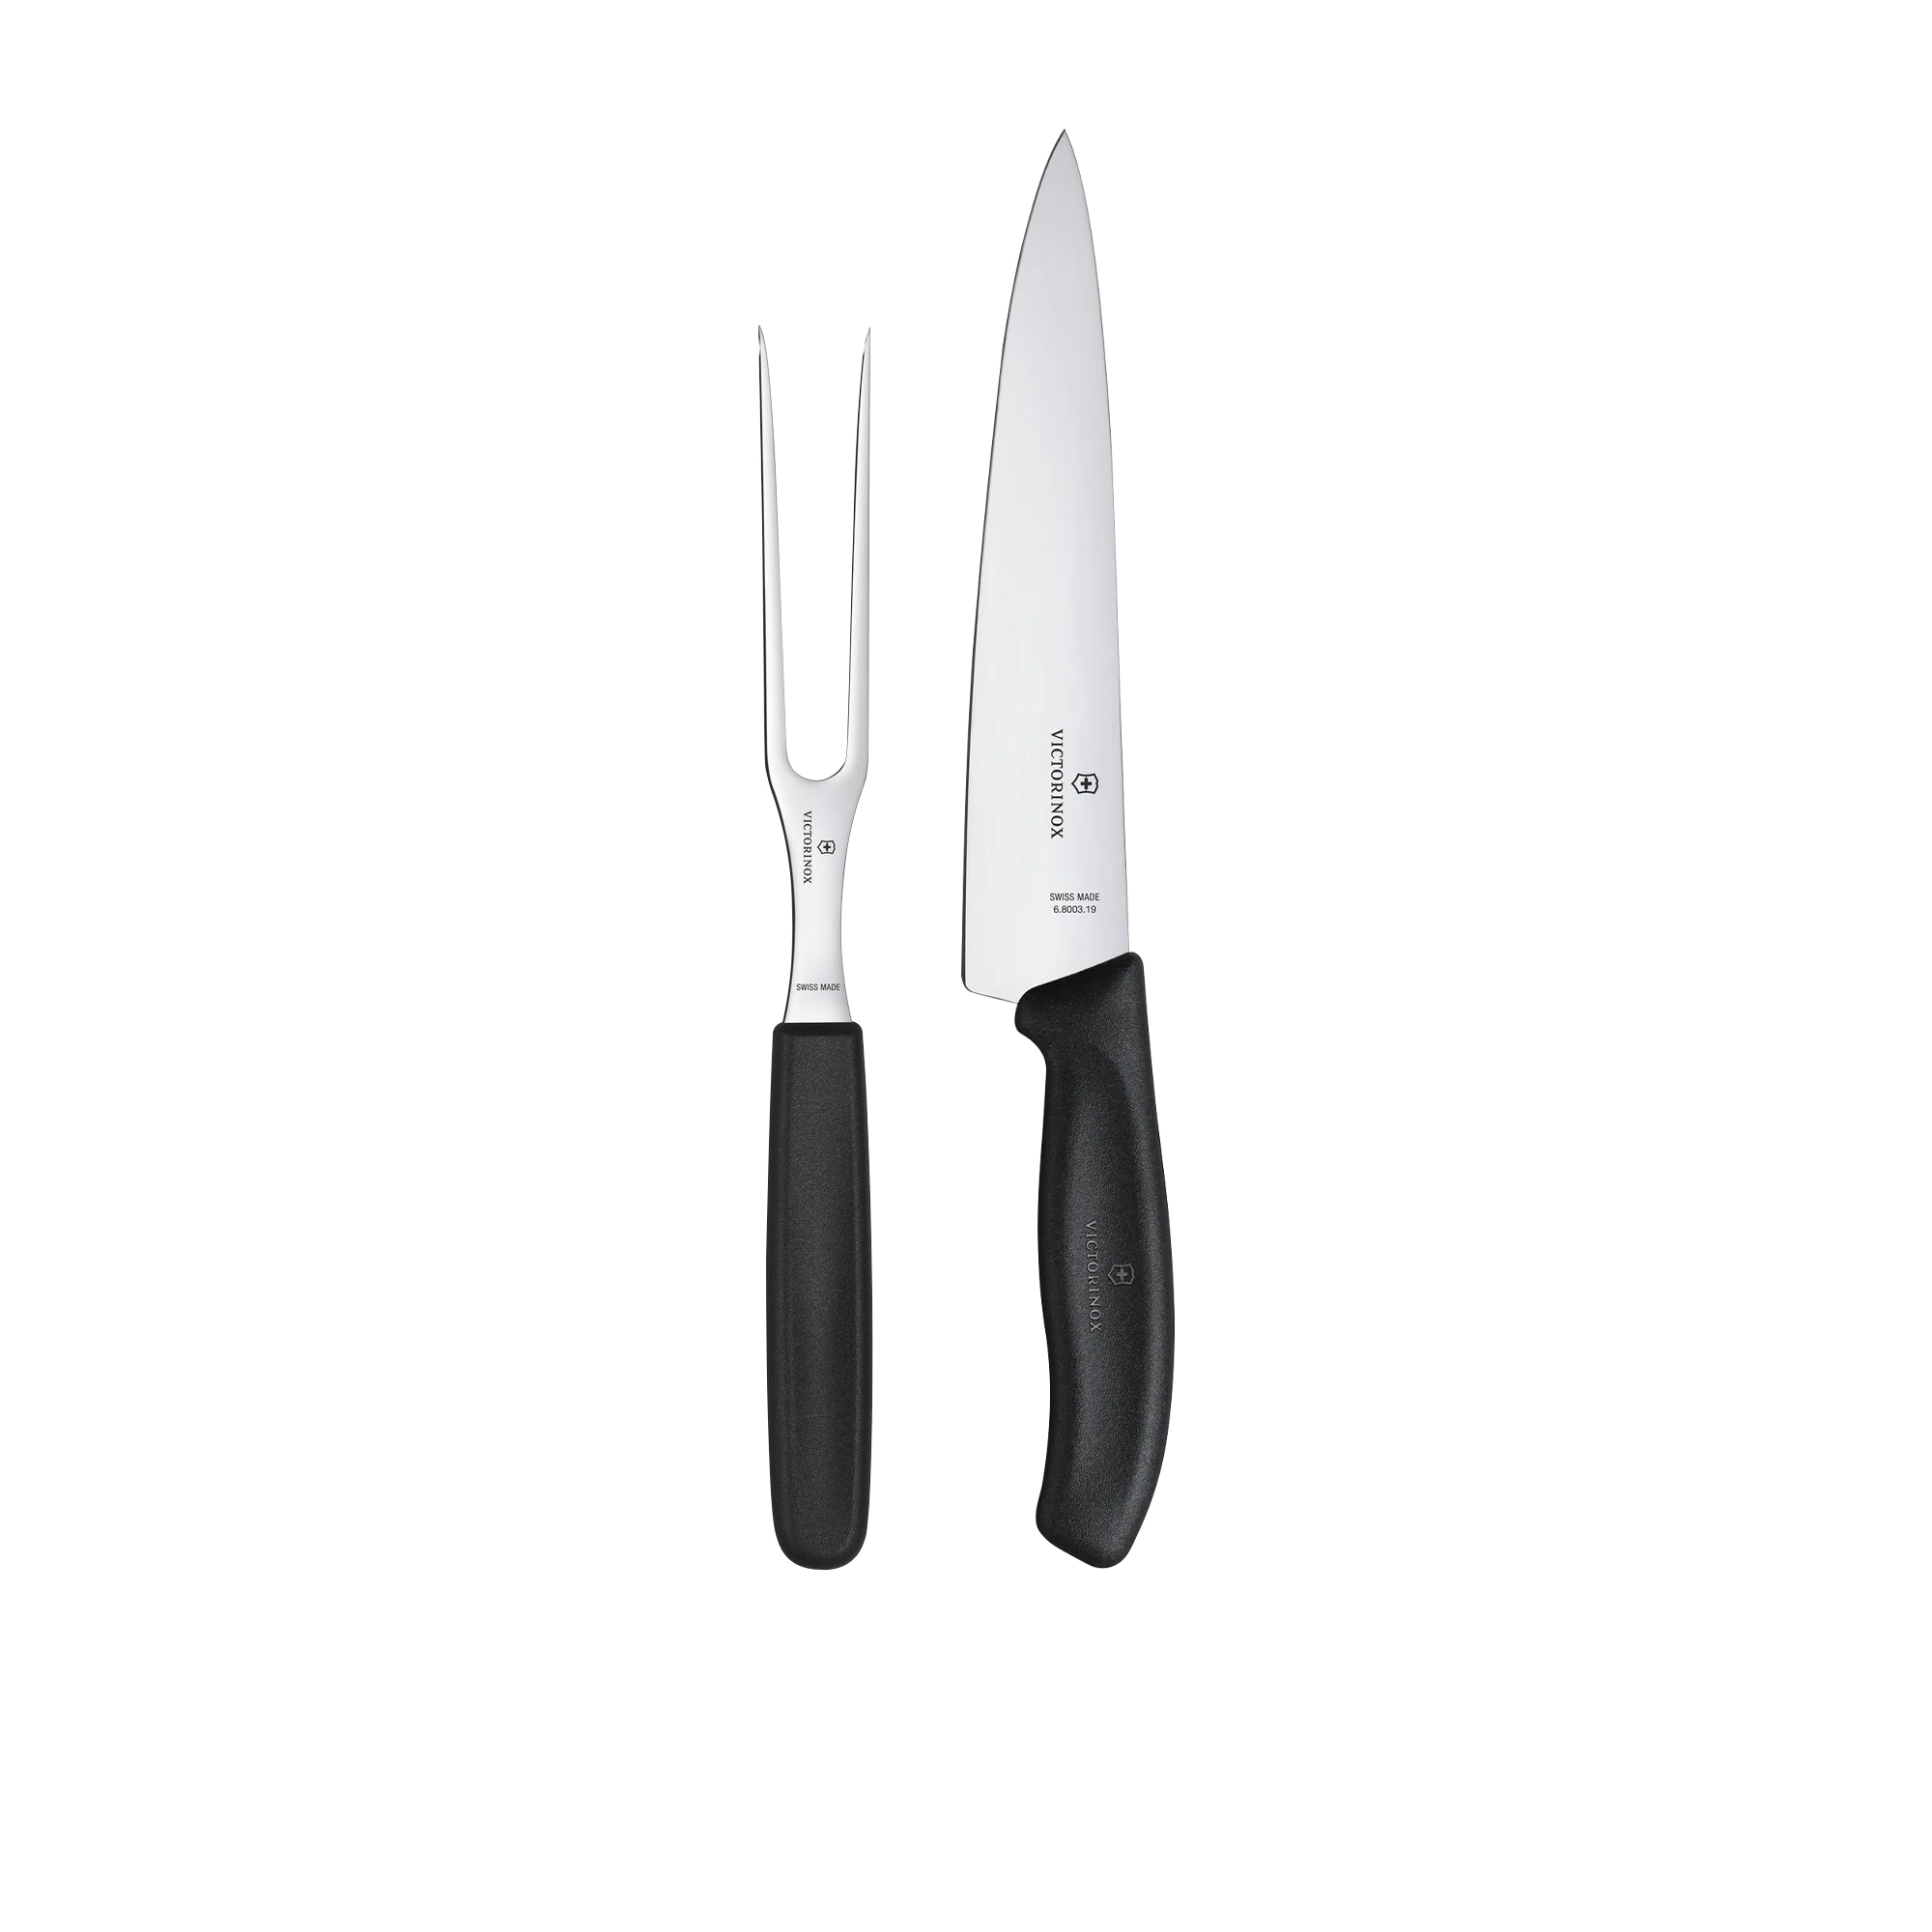 Victorinox Classic 2pc Carving Knife Set Image 1